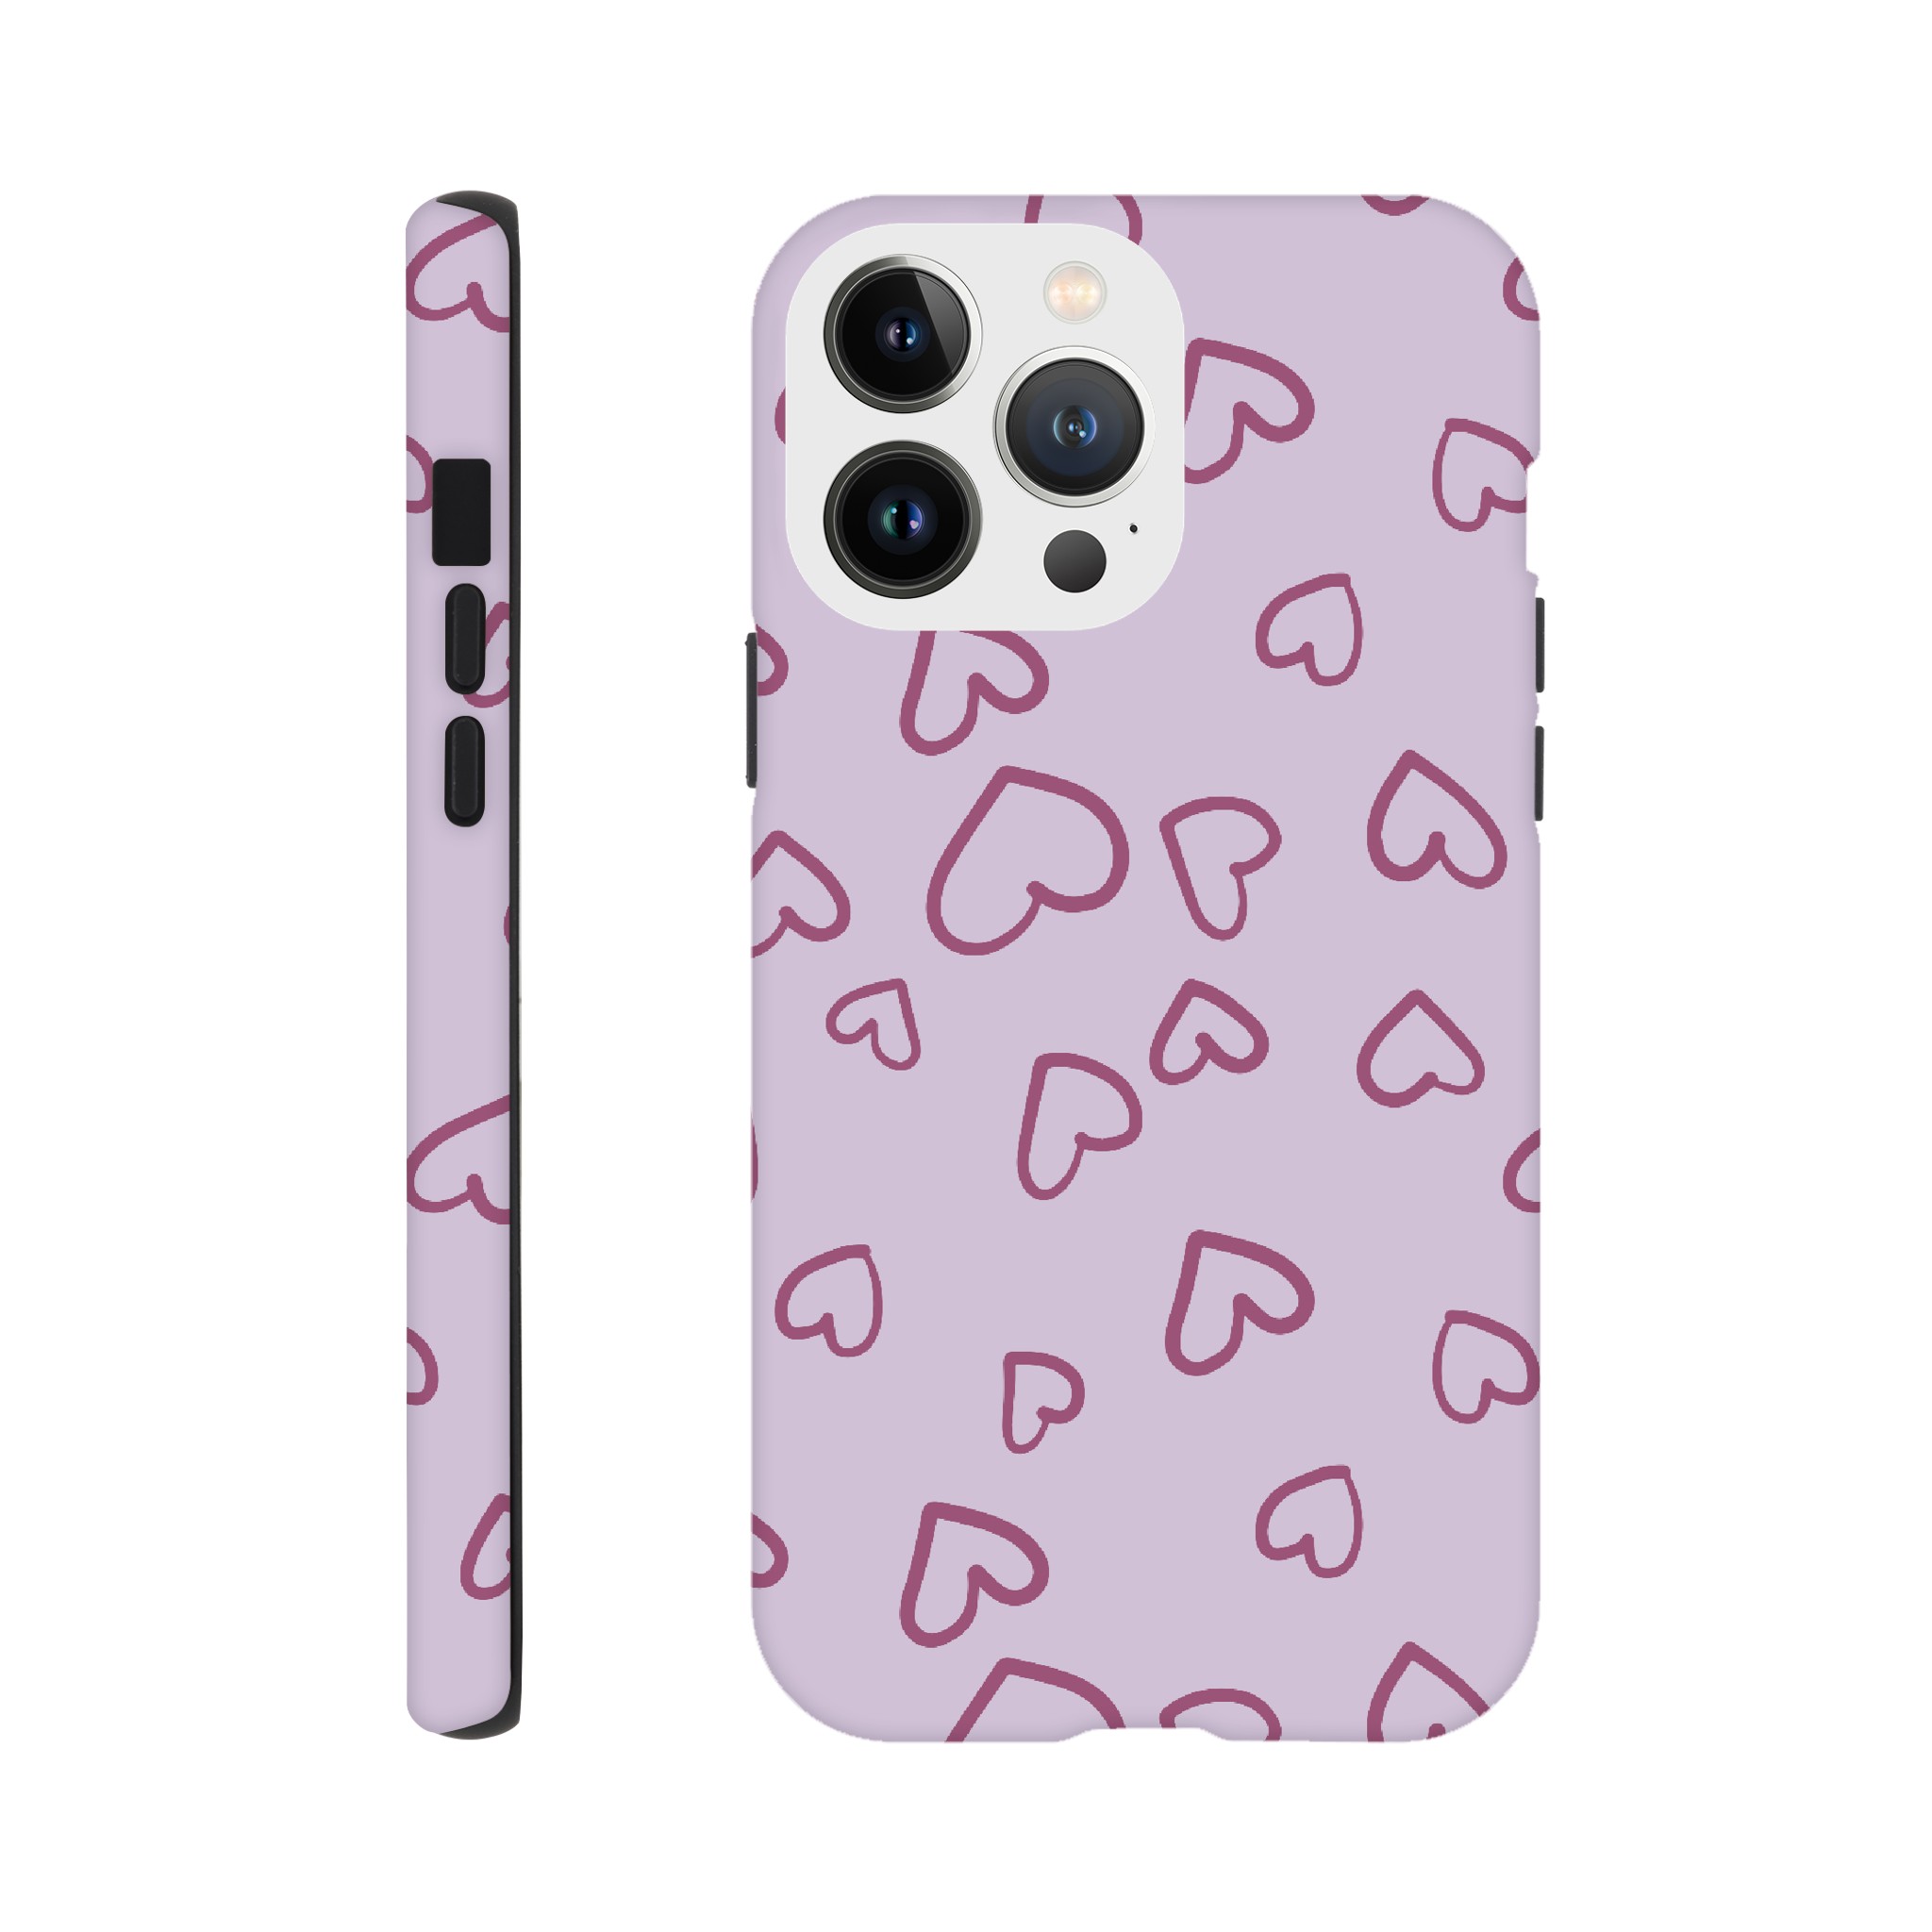 Love Heart Tough case for iPhone